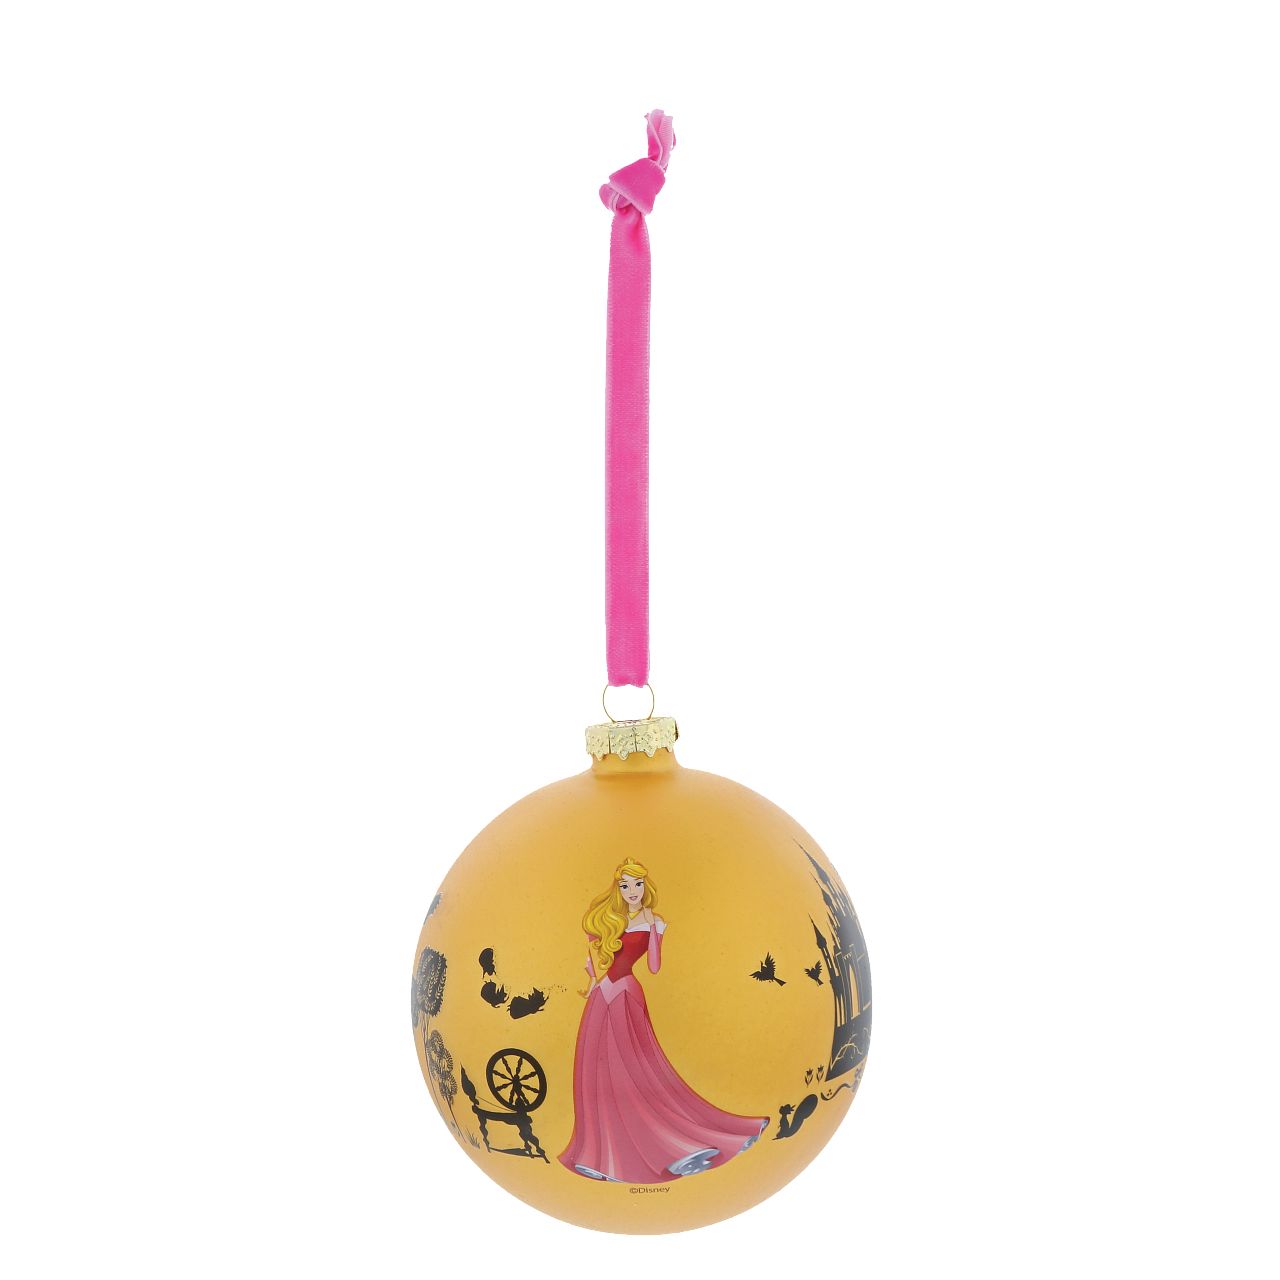 Disney Christmas Bauble Sleeping Beauty Once Upon a Dream  Enchanting Disney Collection  The princess Aurora dreams of her prince in this beautiful gold coloured glass bauble. This Sleeping Beauty treasured keepsake would make a lovely unique gift for a friend, or a self-purchase to brighten up the home. Presented in a branded window box.